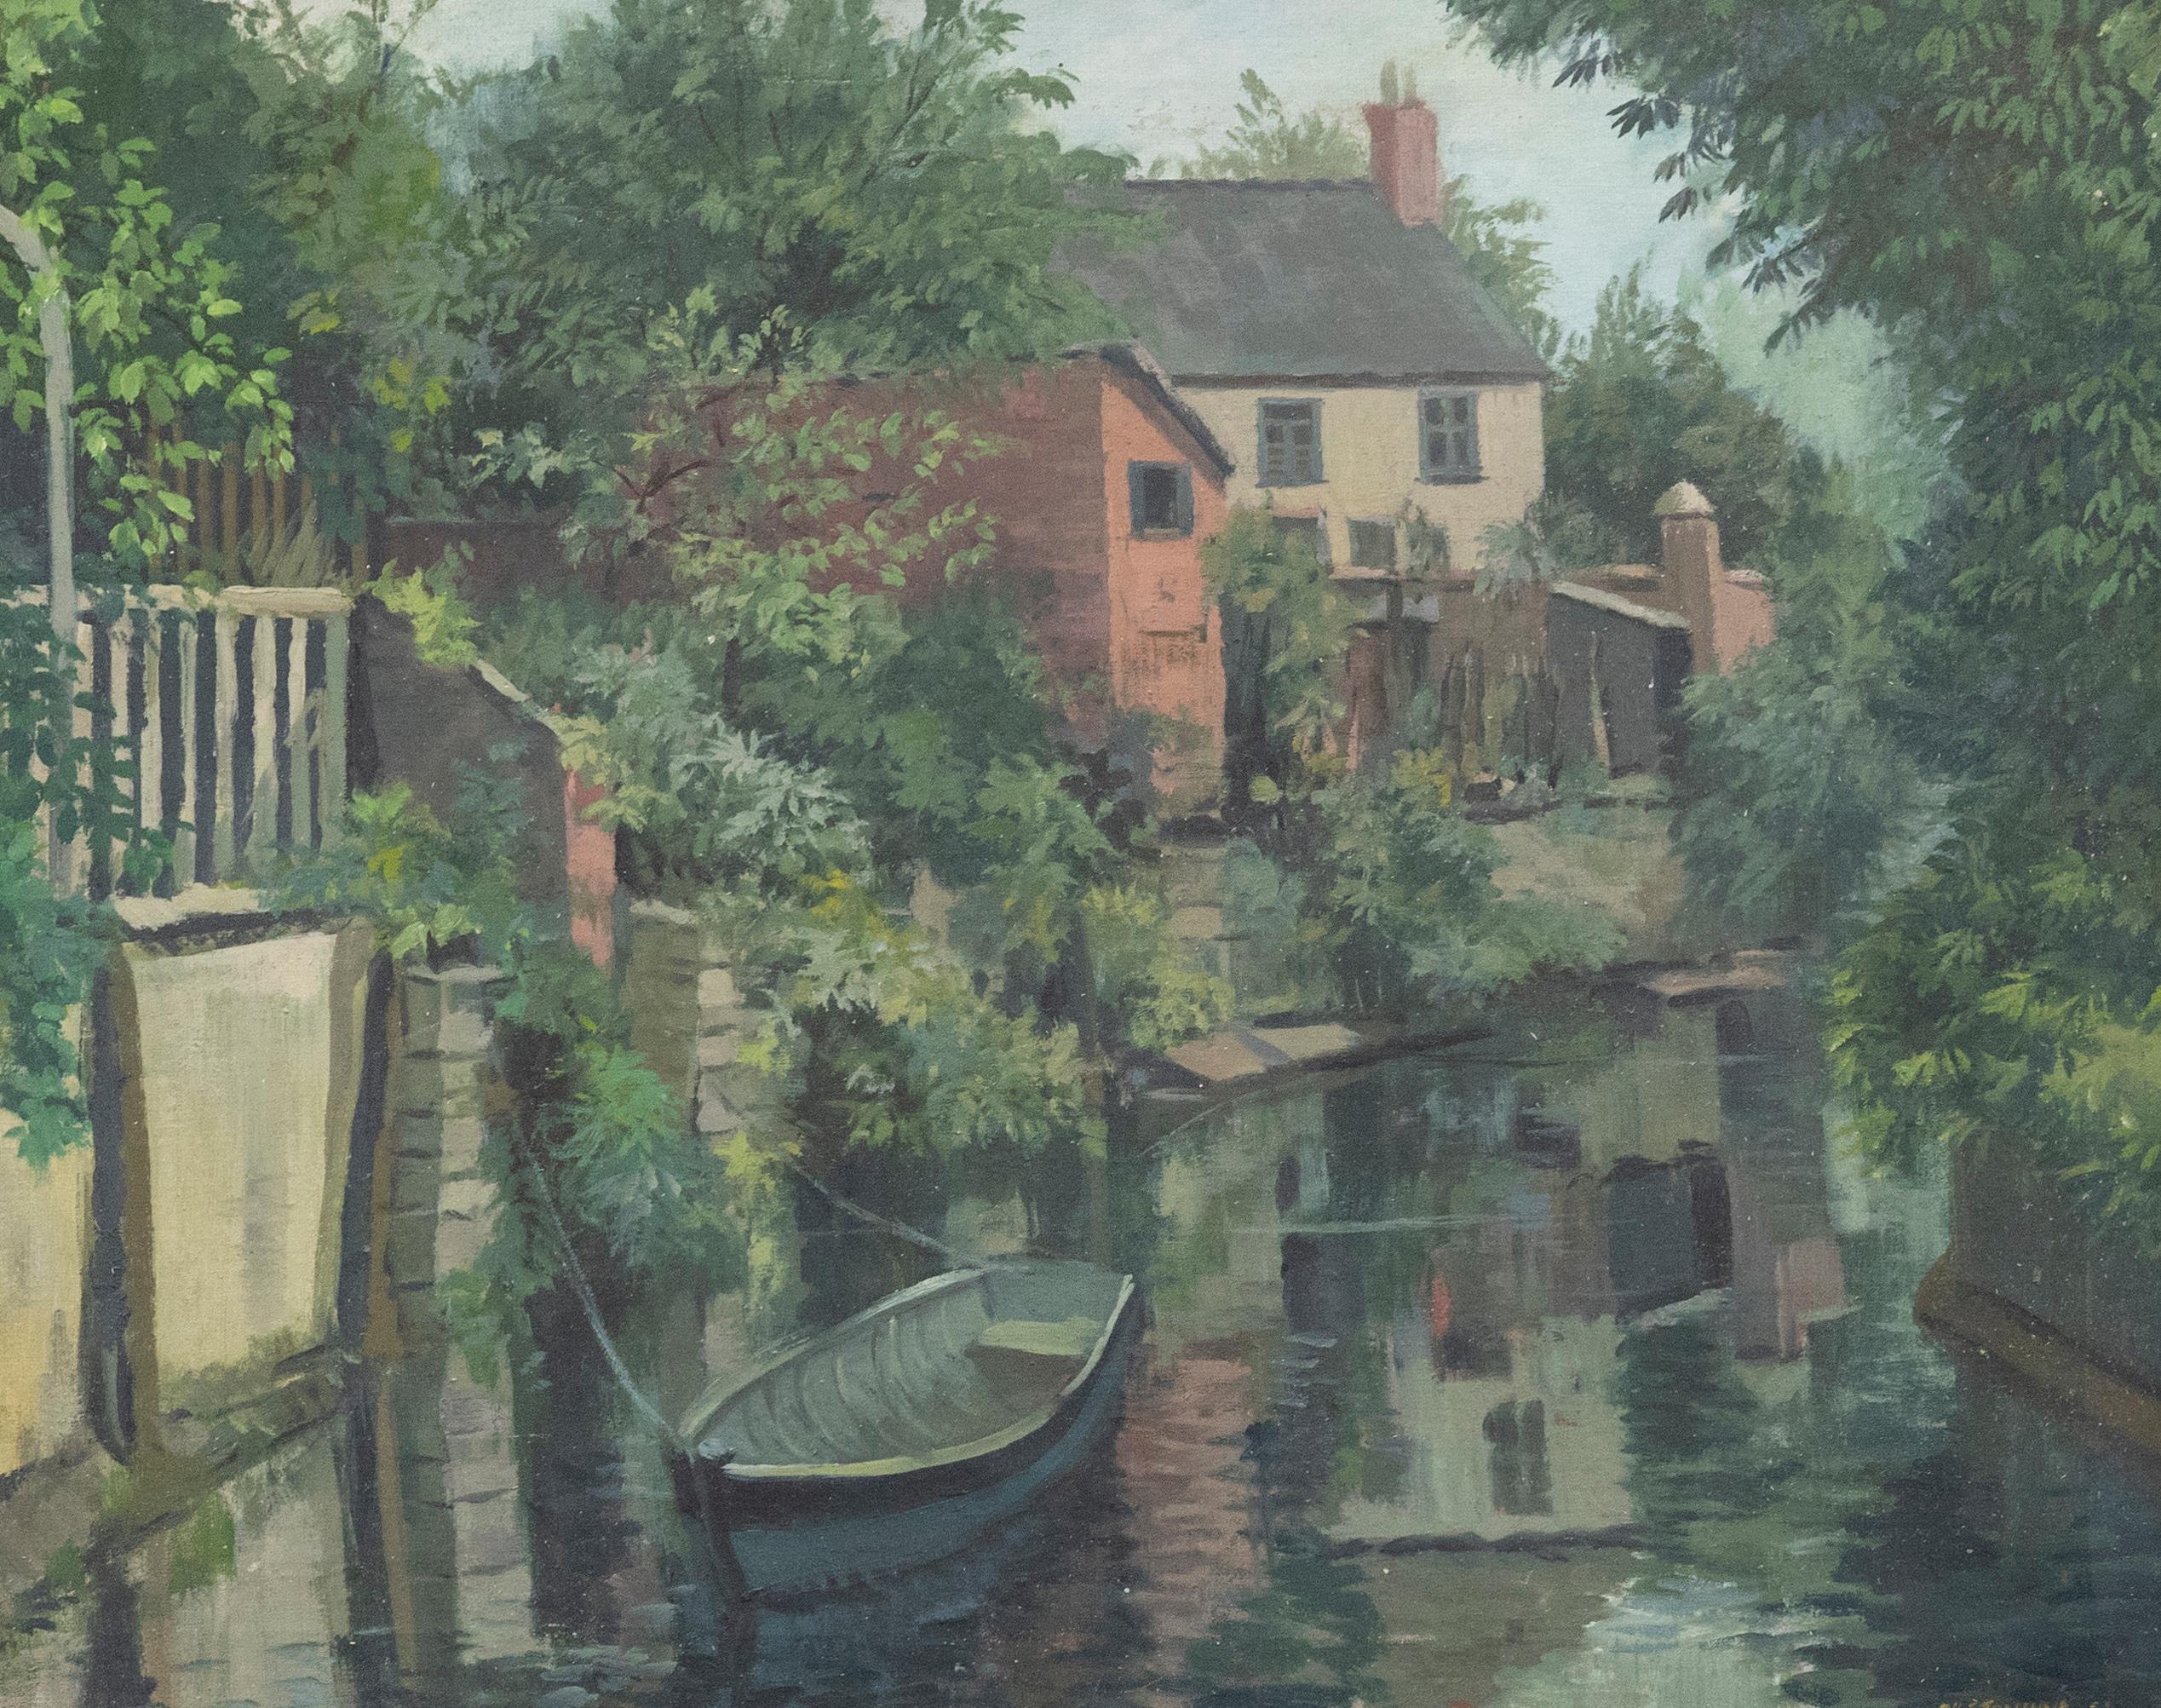 This charming mid century oil study depicting cottages with gardens running down to the riverbank. In the foreground a small rowing mount is moored to the bank. The artist captures the scene in a a style typical to the mid 20th century, showing a